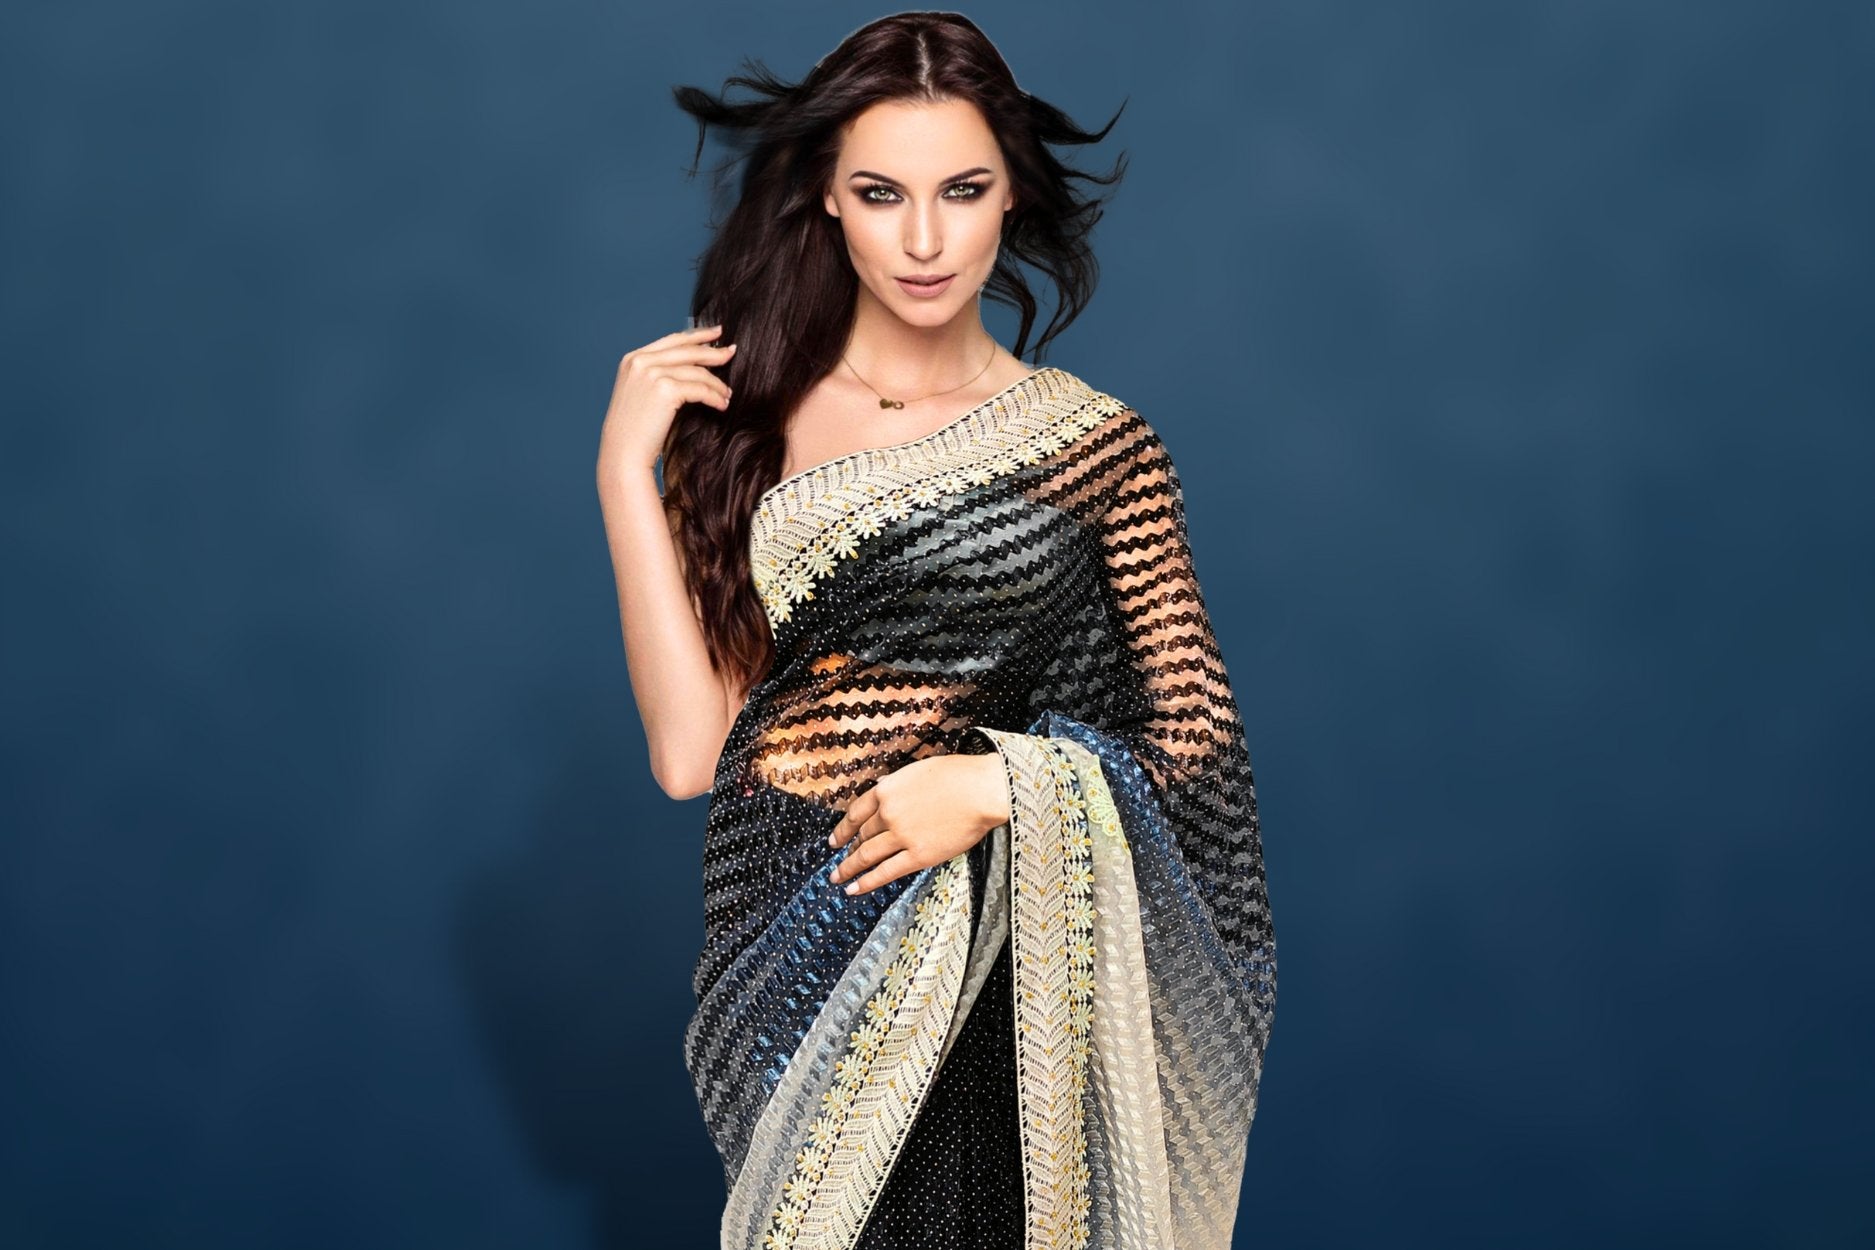 Buy Gorgeous Net Saree for a Glamorous Look